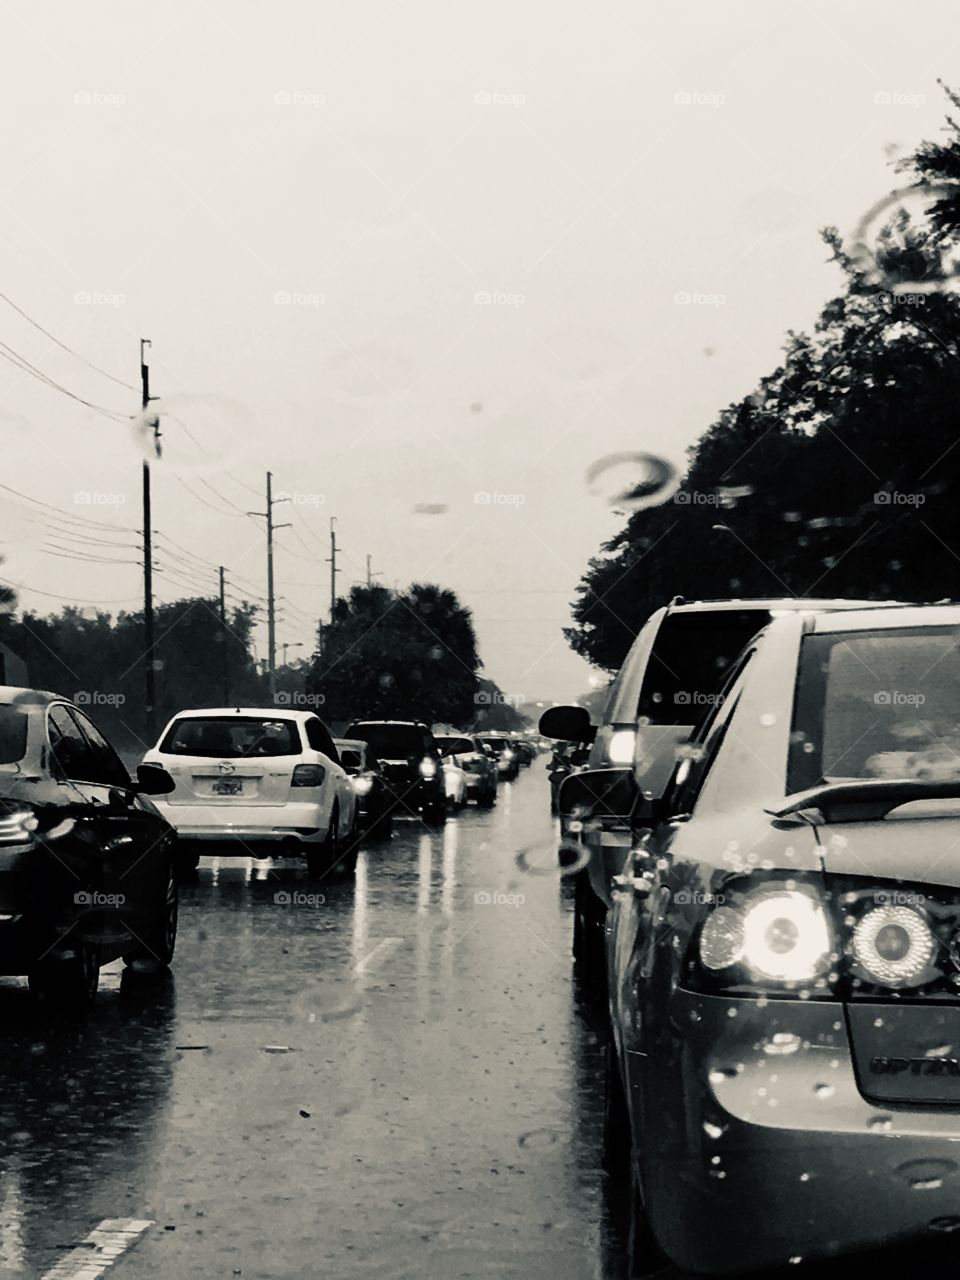 Traffic on a rainy road in black and white 